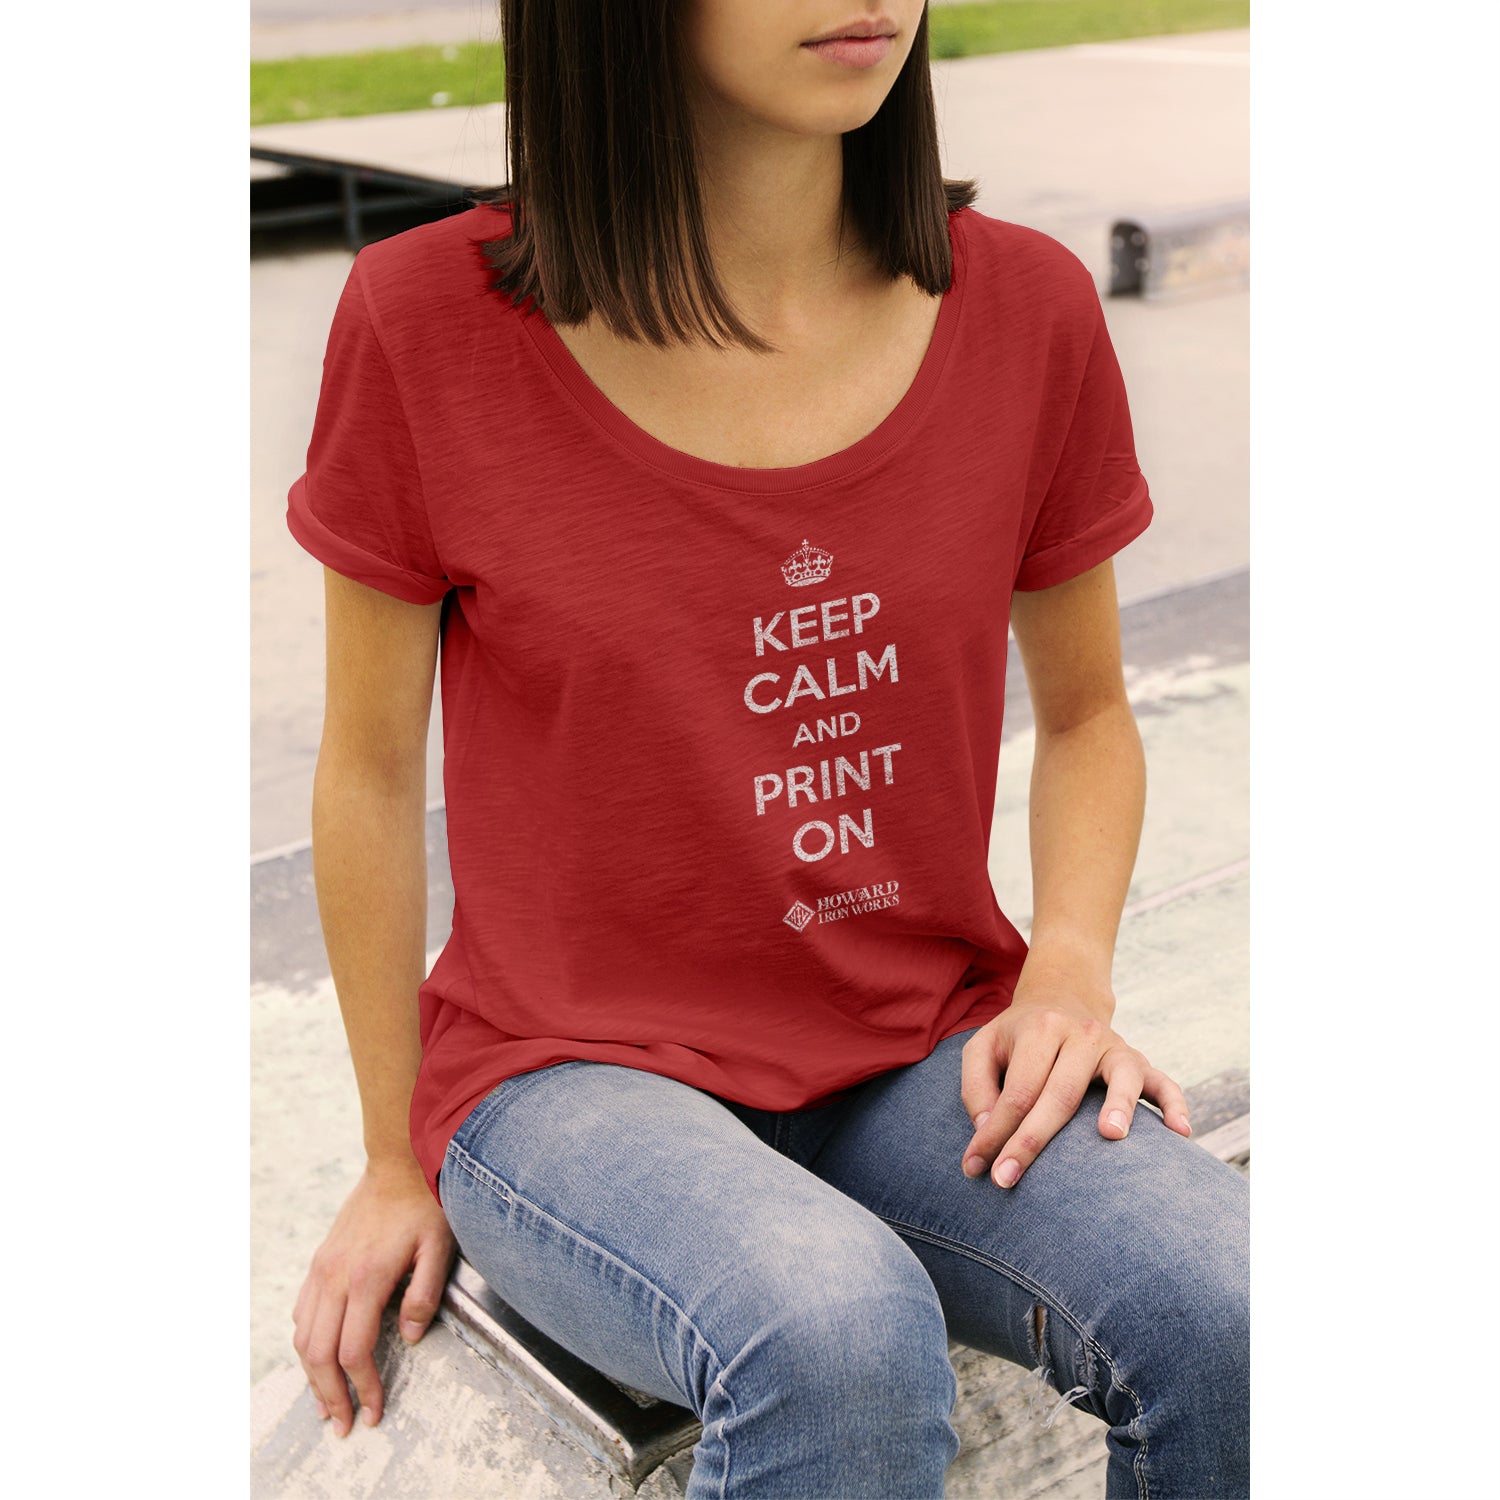 Keep Calm and Print On T-Shirt, Short Sleeve, Red - from Howard Iron Works Printing Museum